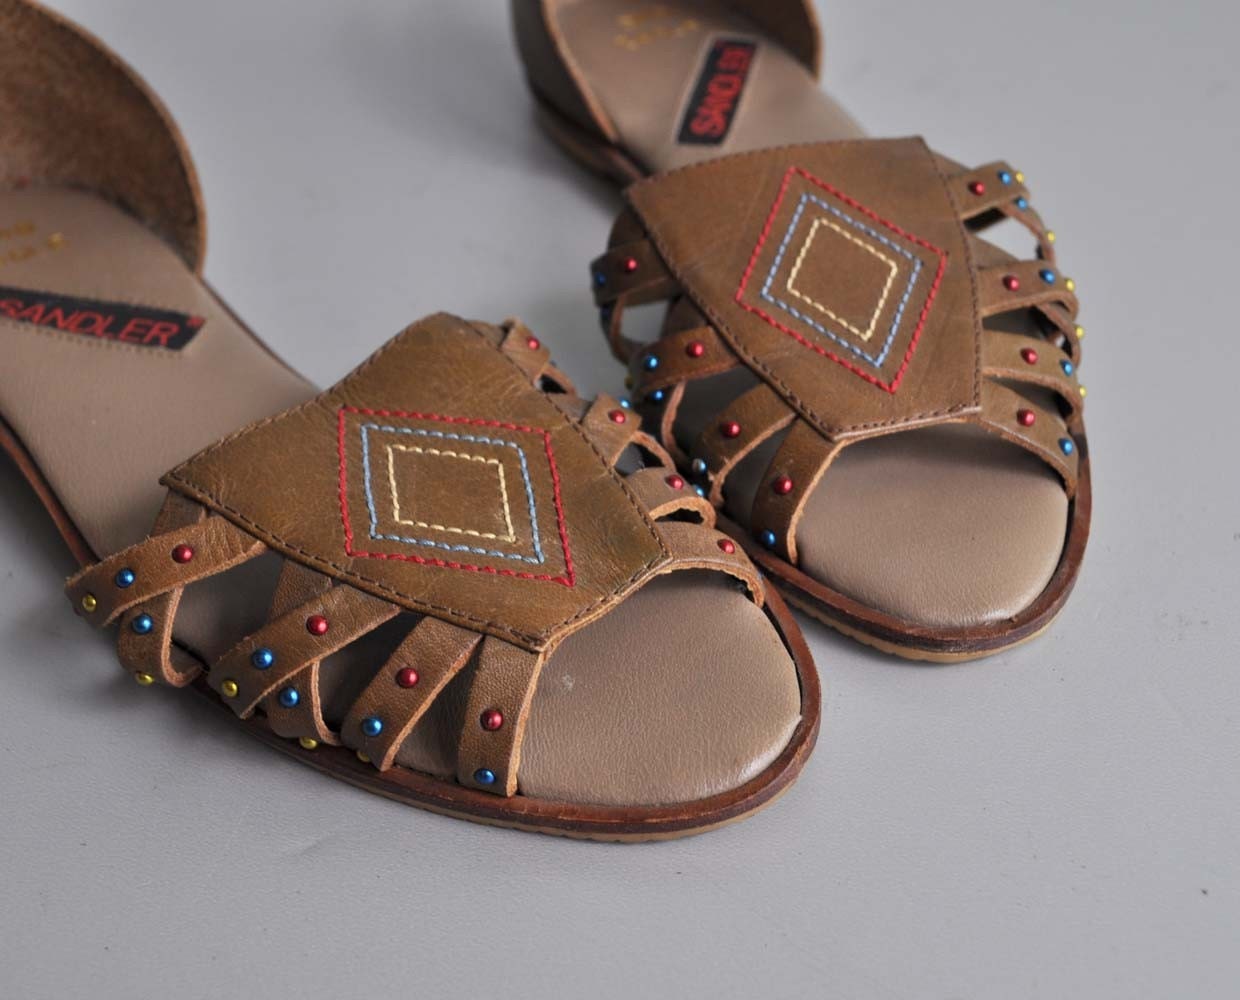 Cool 80s tribal sandals